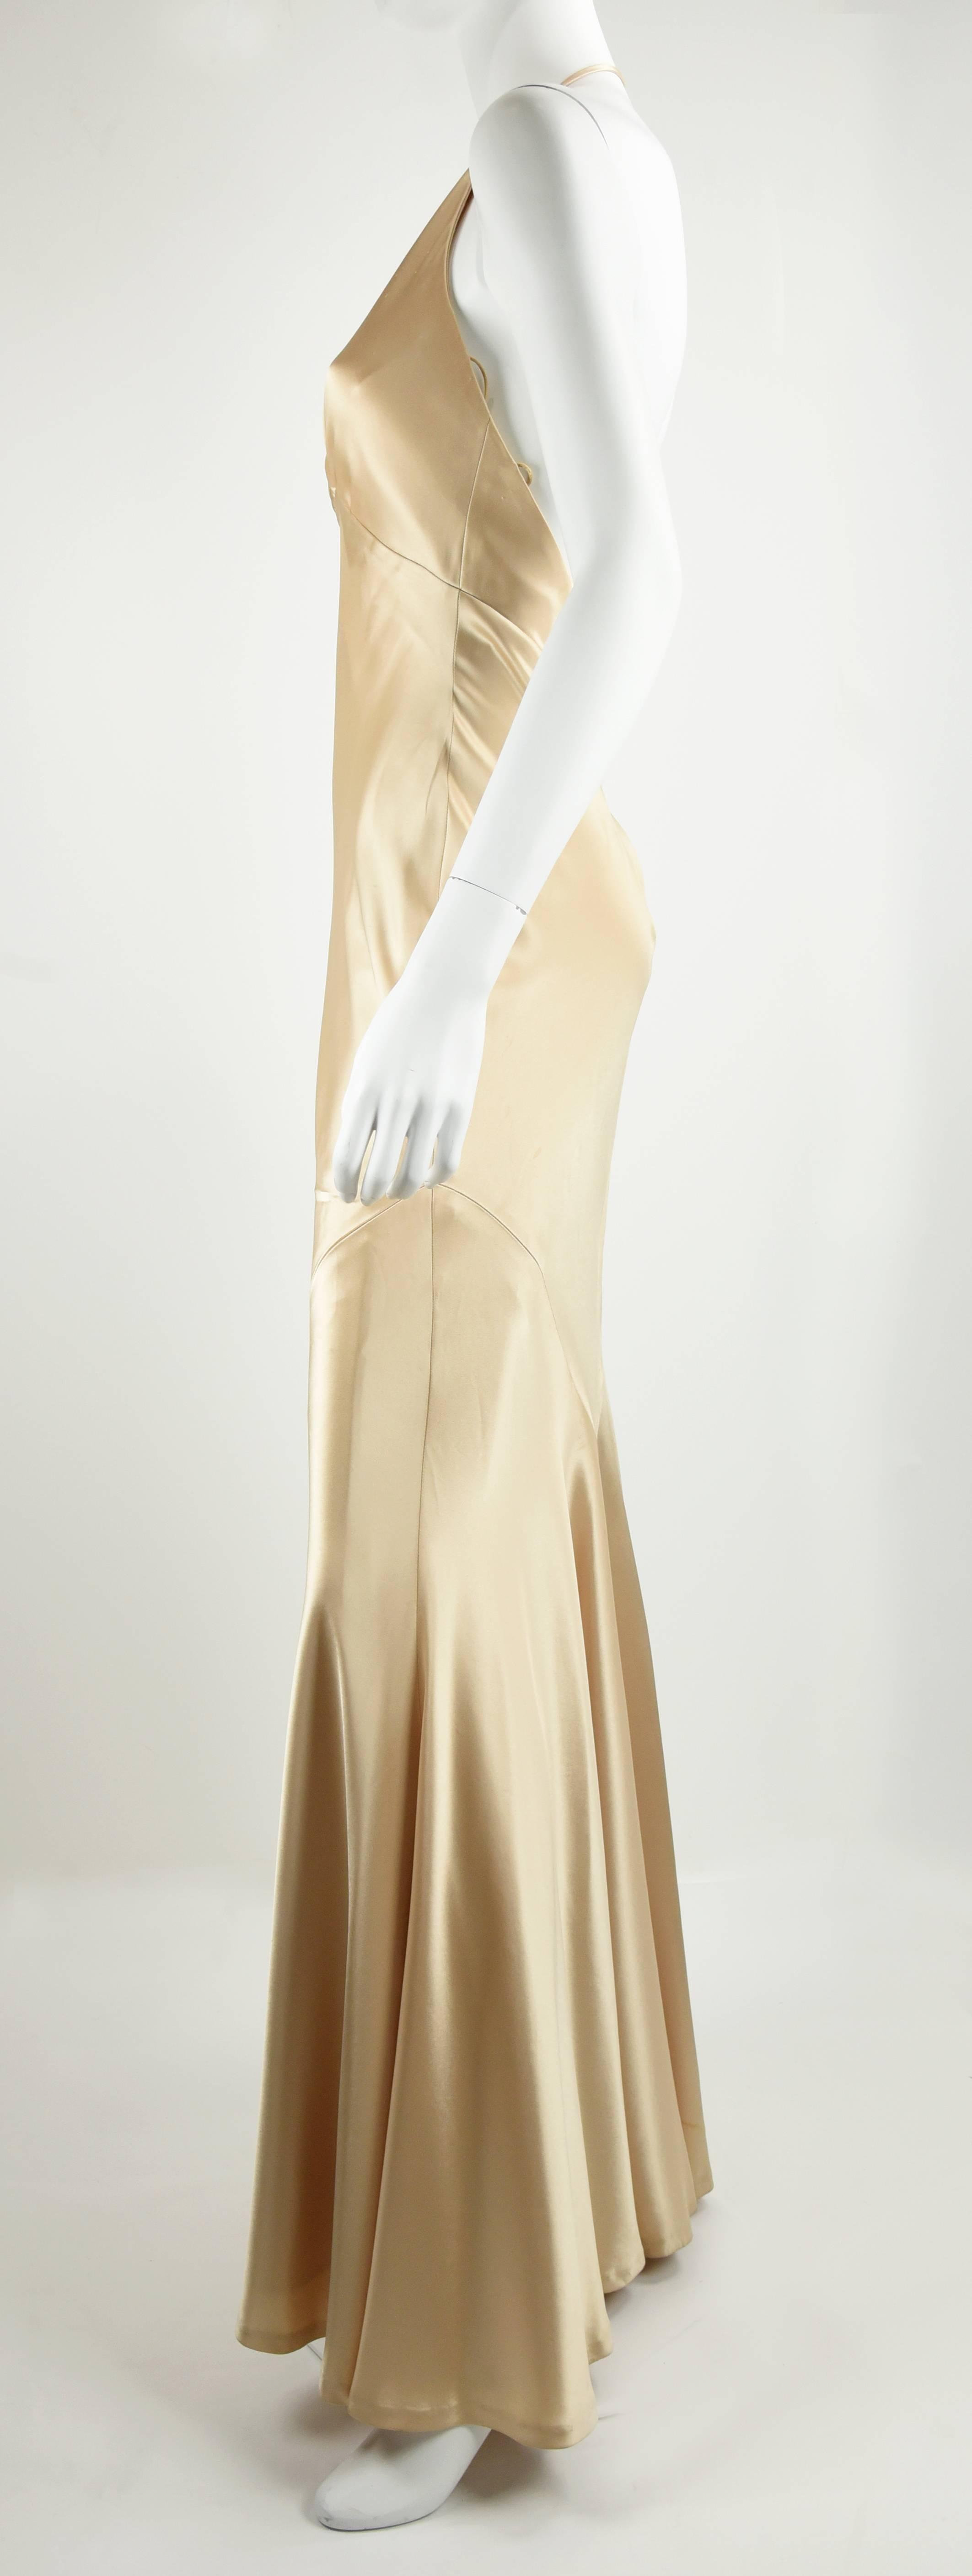 Beige 1990s Carmen Marc Valvo Champagne Satin Jean Harlow Gown Size 6 For Sale